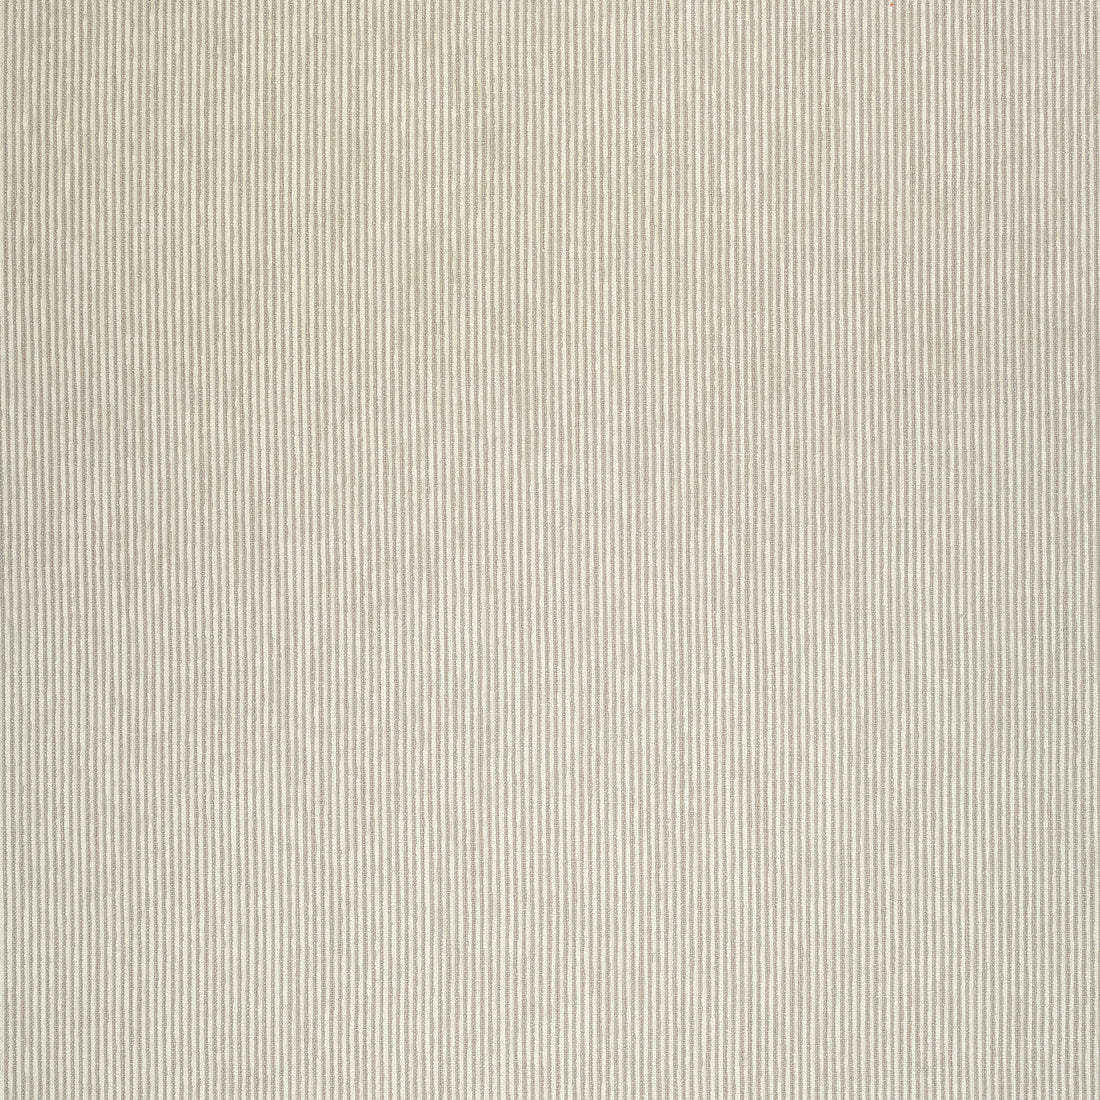 Portsmouth fabric in linen color - pattern number W73433 - by Thibaut in the Landmark Textures collection